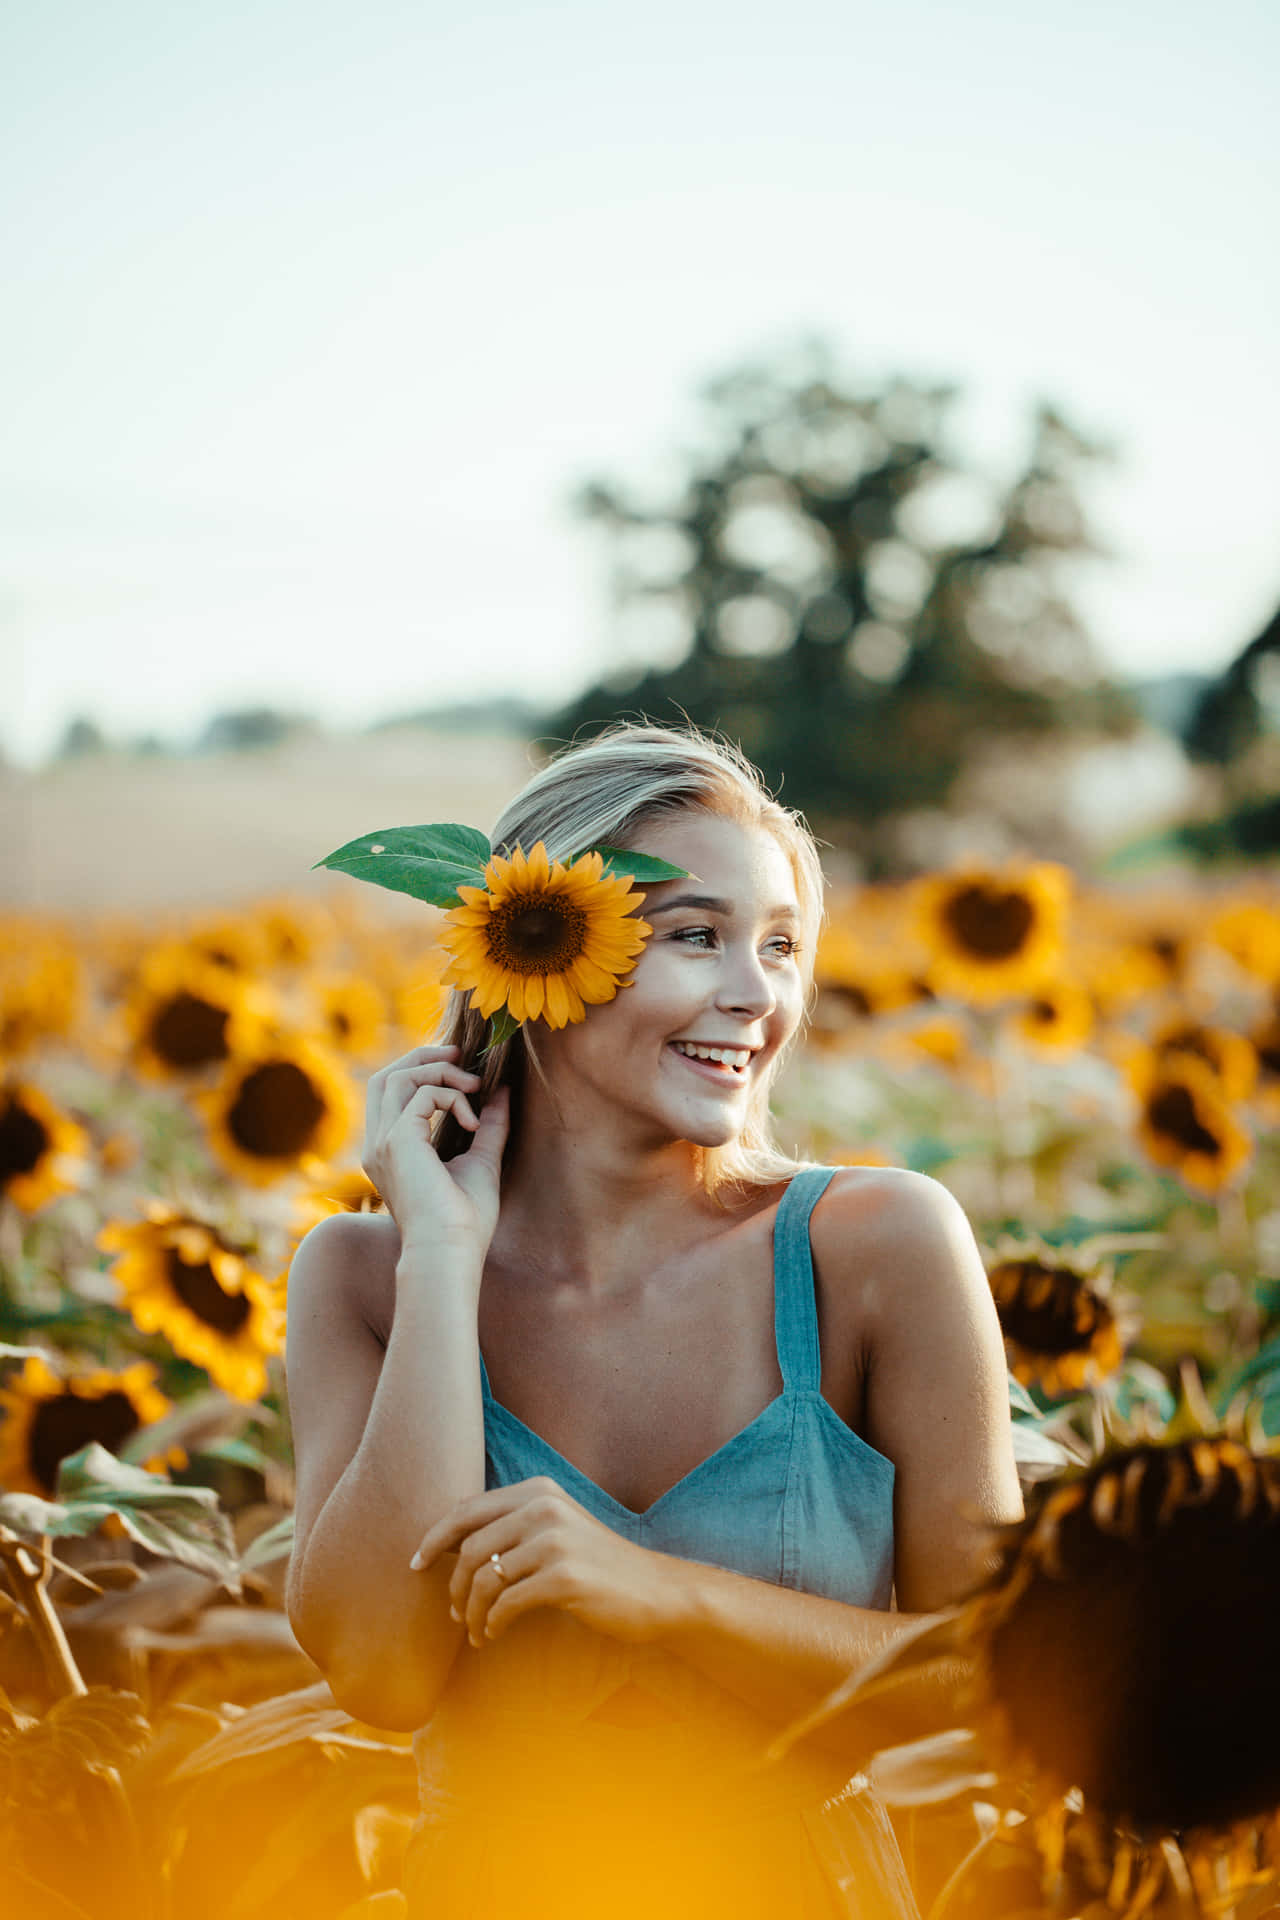 A Woman In A Sunflower Field Smiling